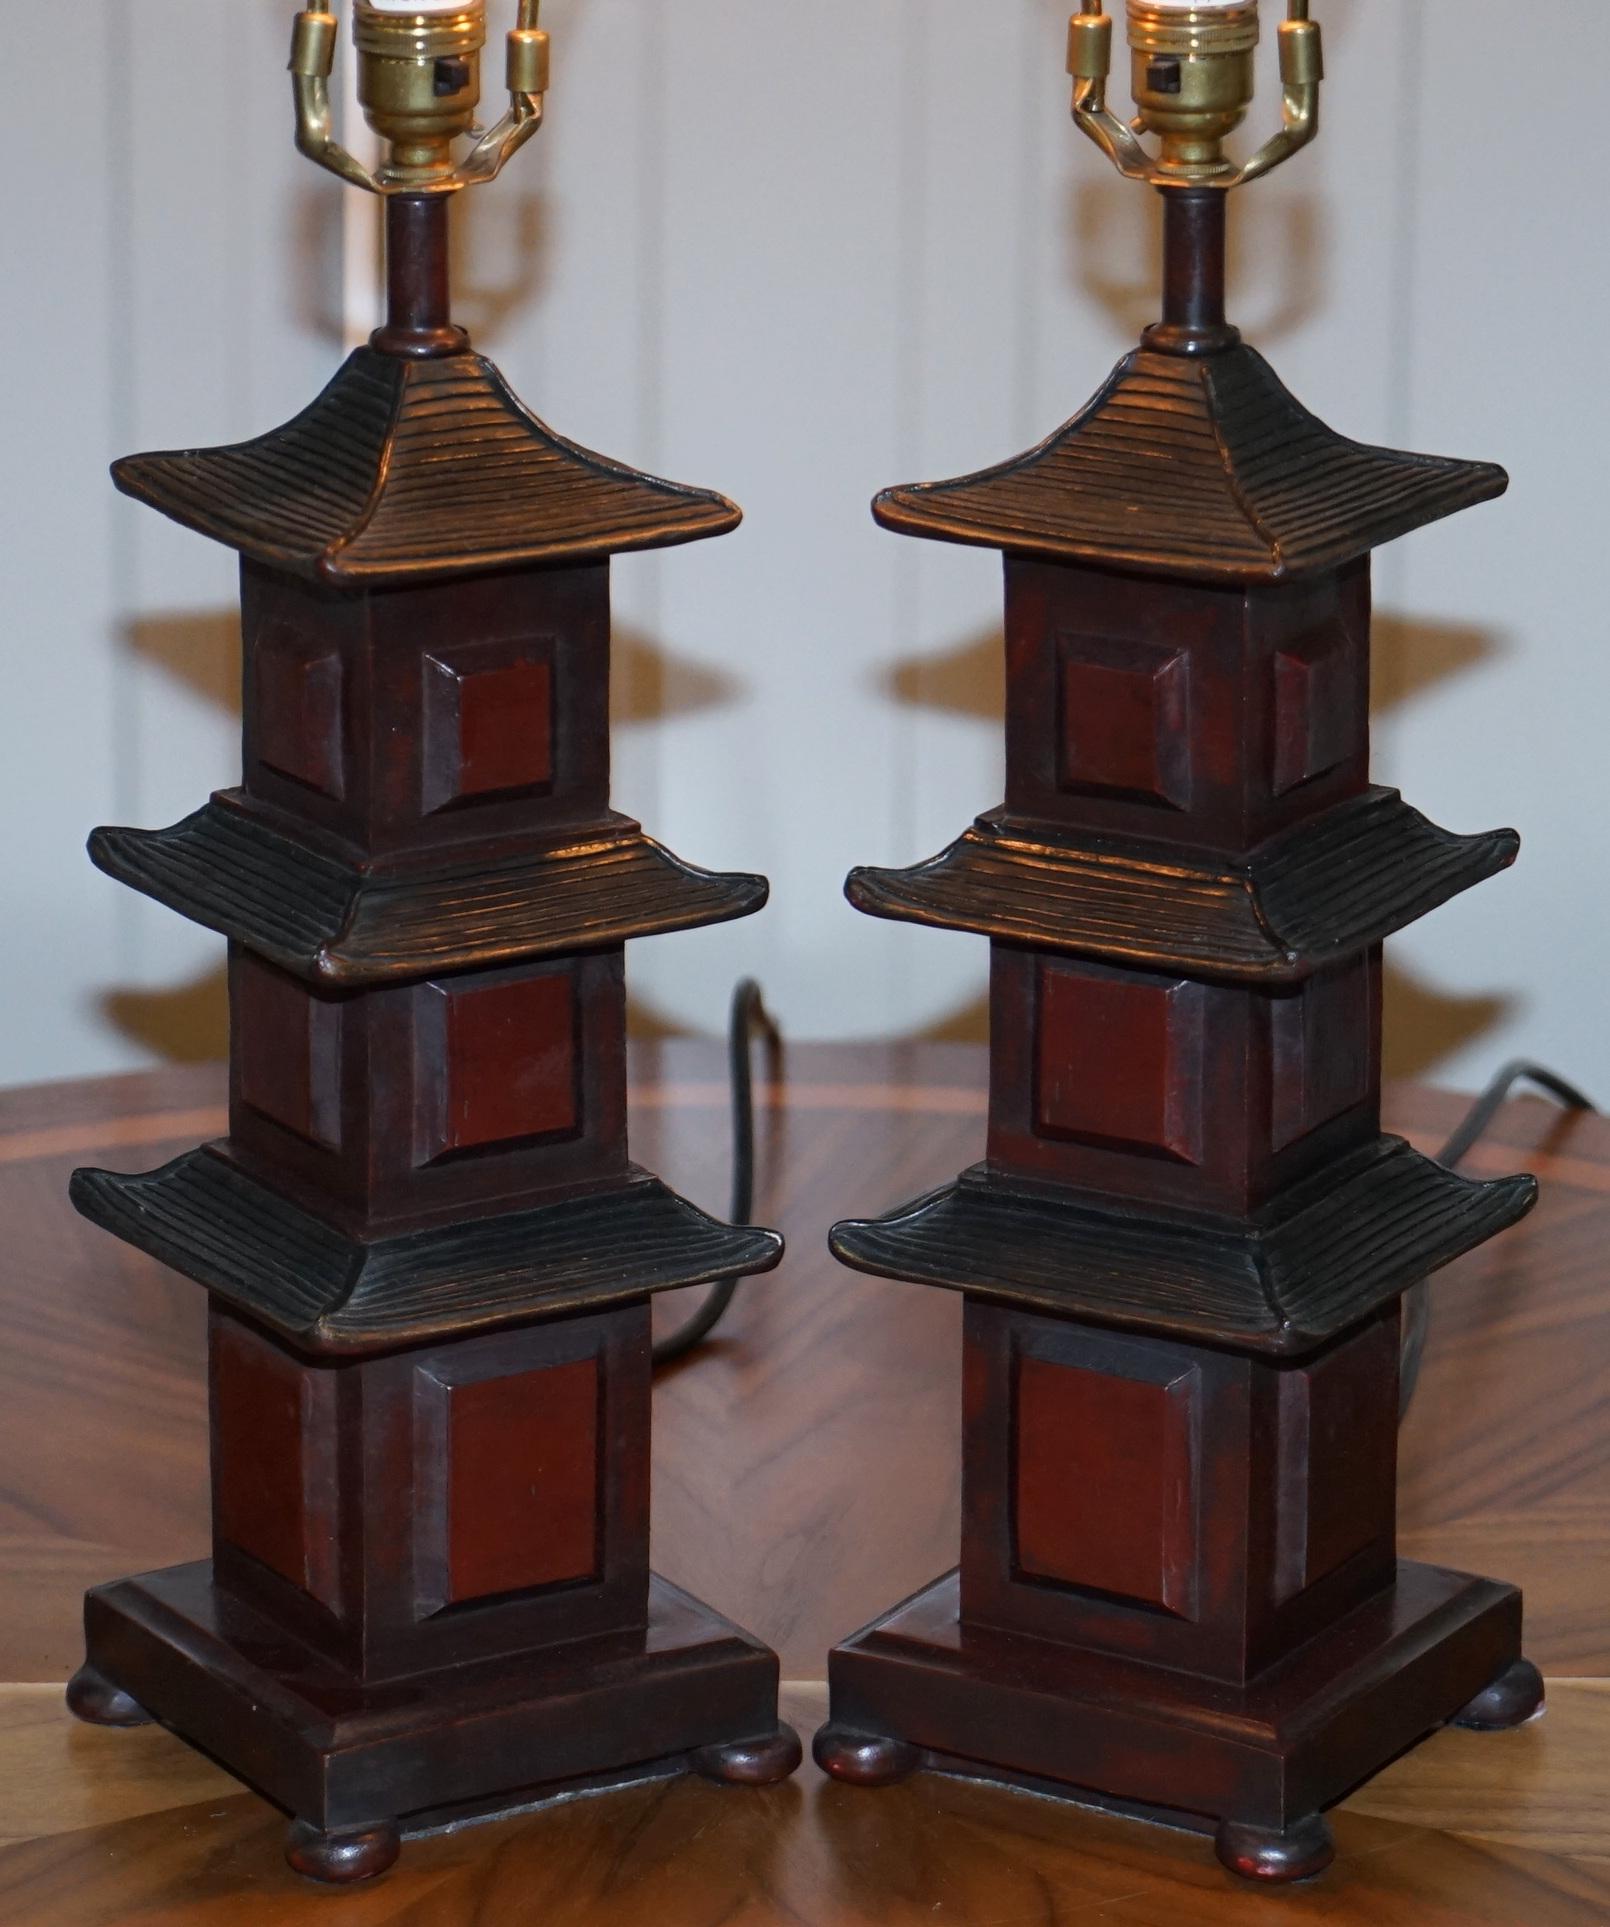 We are delighted to offer for sale this very nice pair of Pagoda temple table lamps made by Austin 2000 for the home collection

A very good looking and well made pair, they have been fully serviced and operate as they should

As you can see